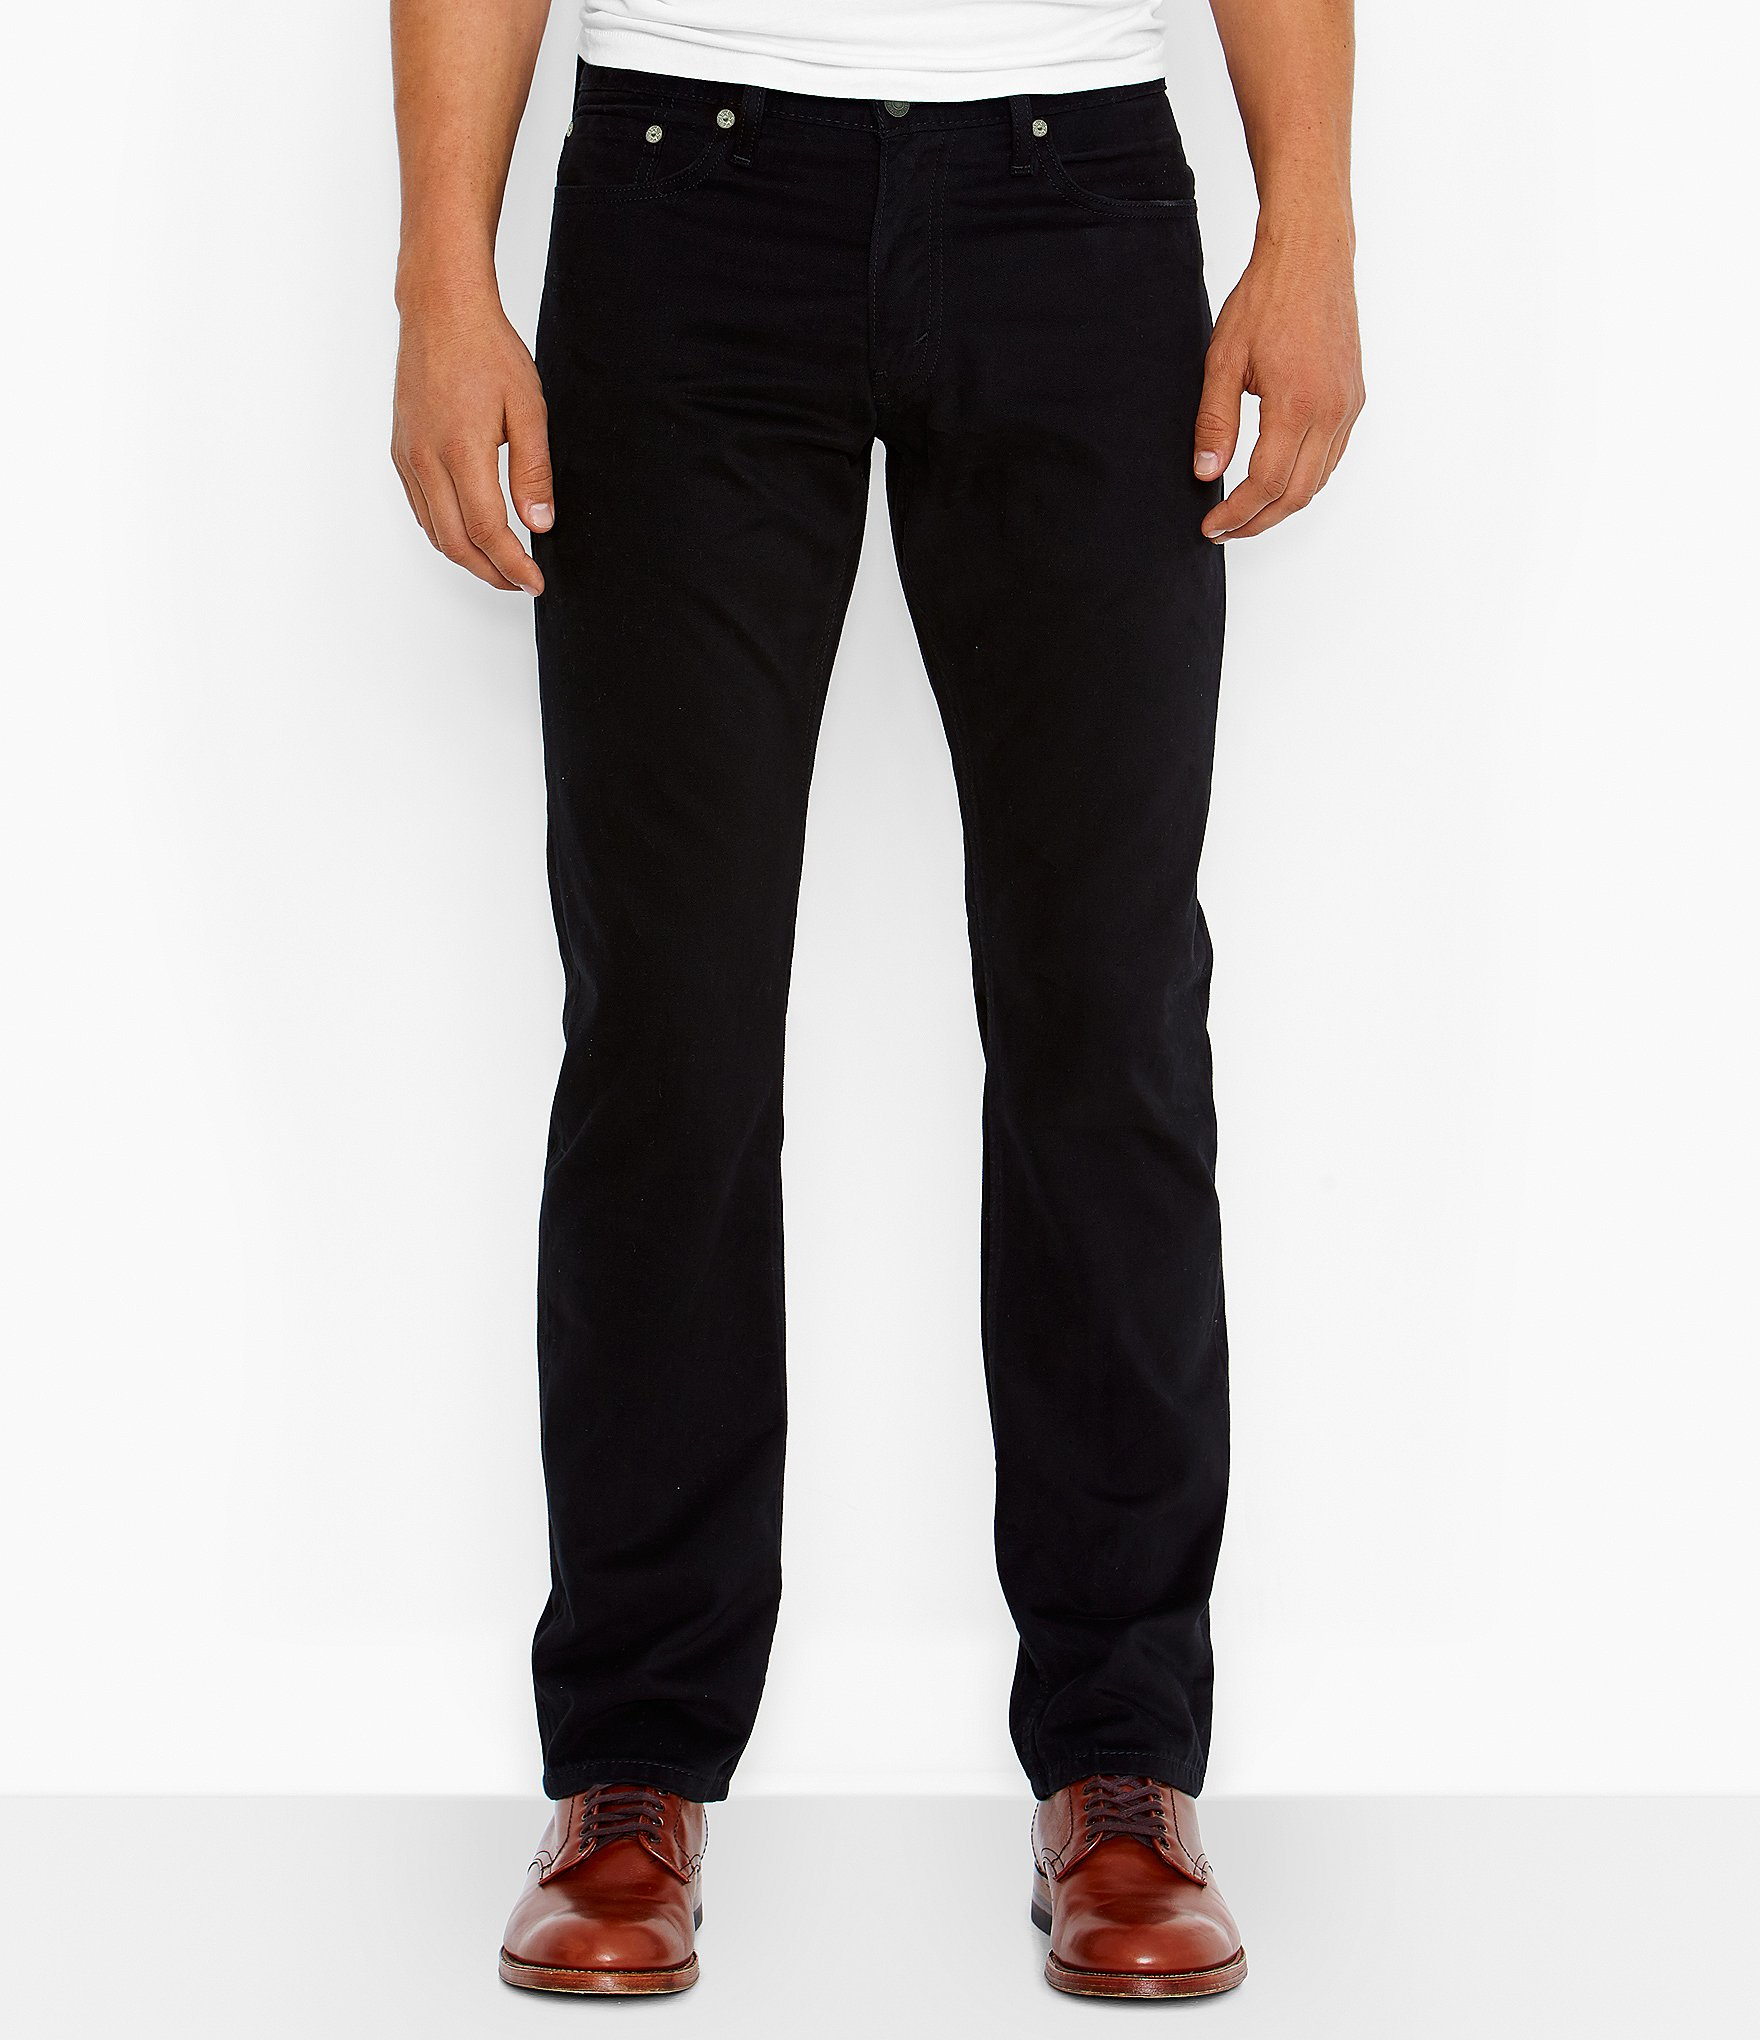 Levi's Men's 514 Straight Fit Soft Twill Pants in Black for Men - Save ...